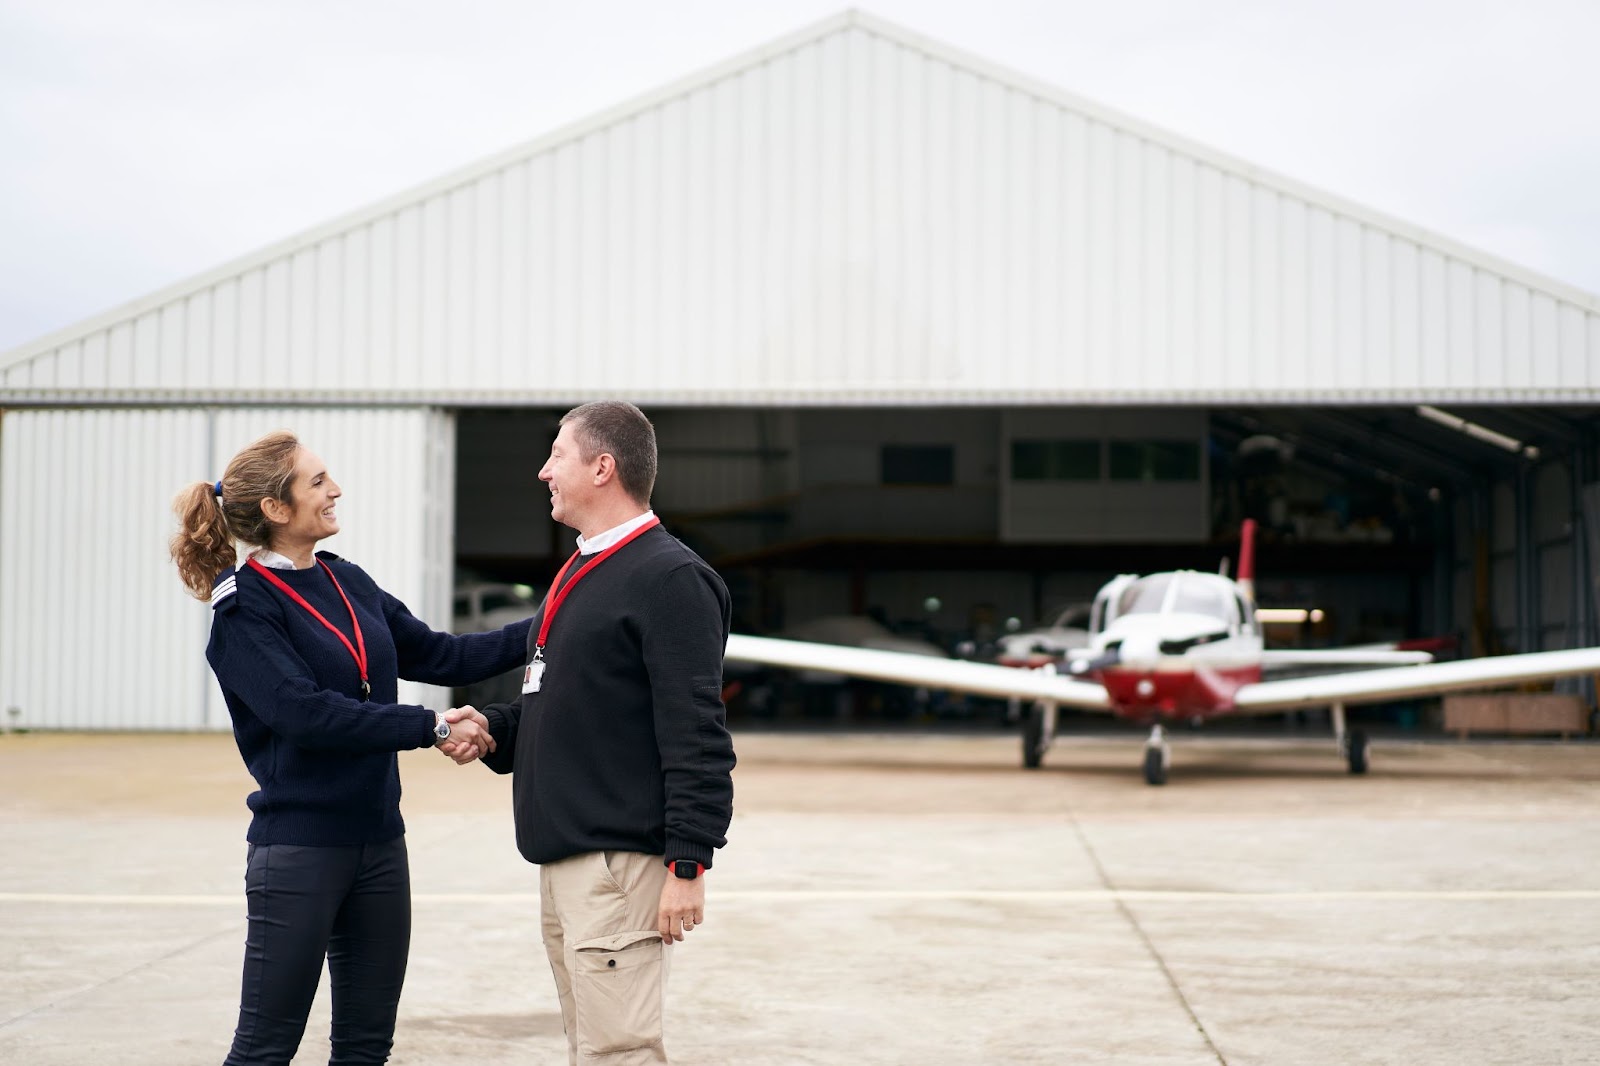 A flight instructor and their student.